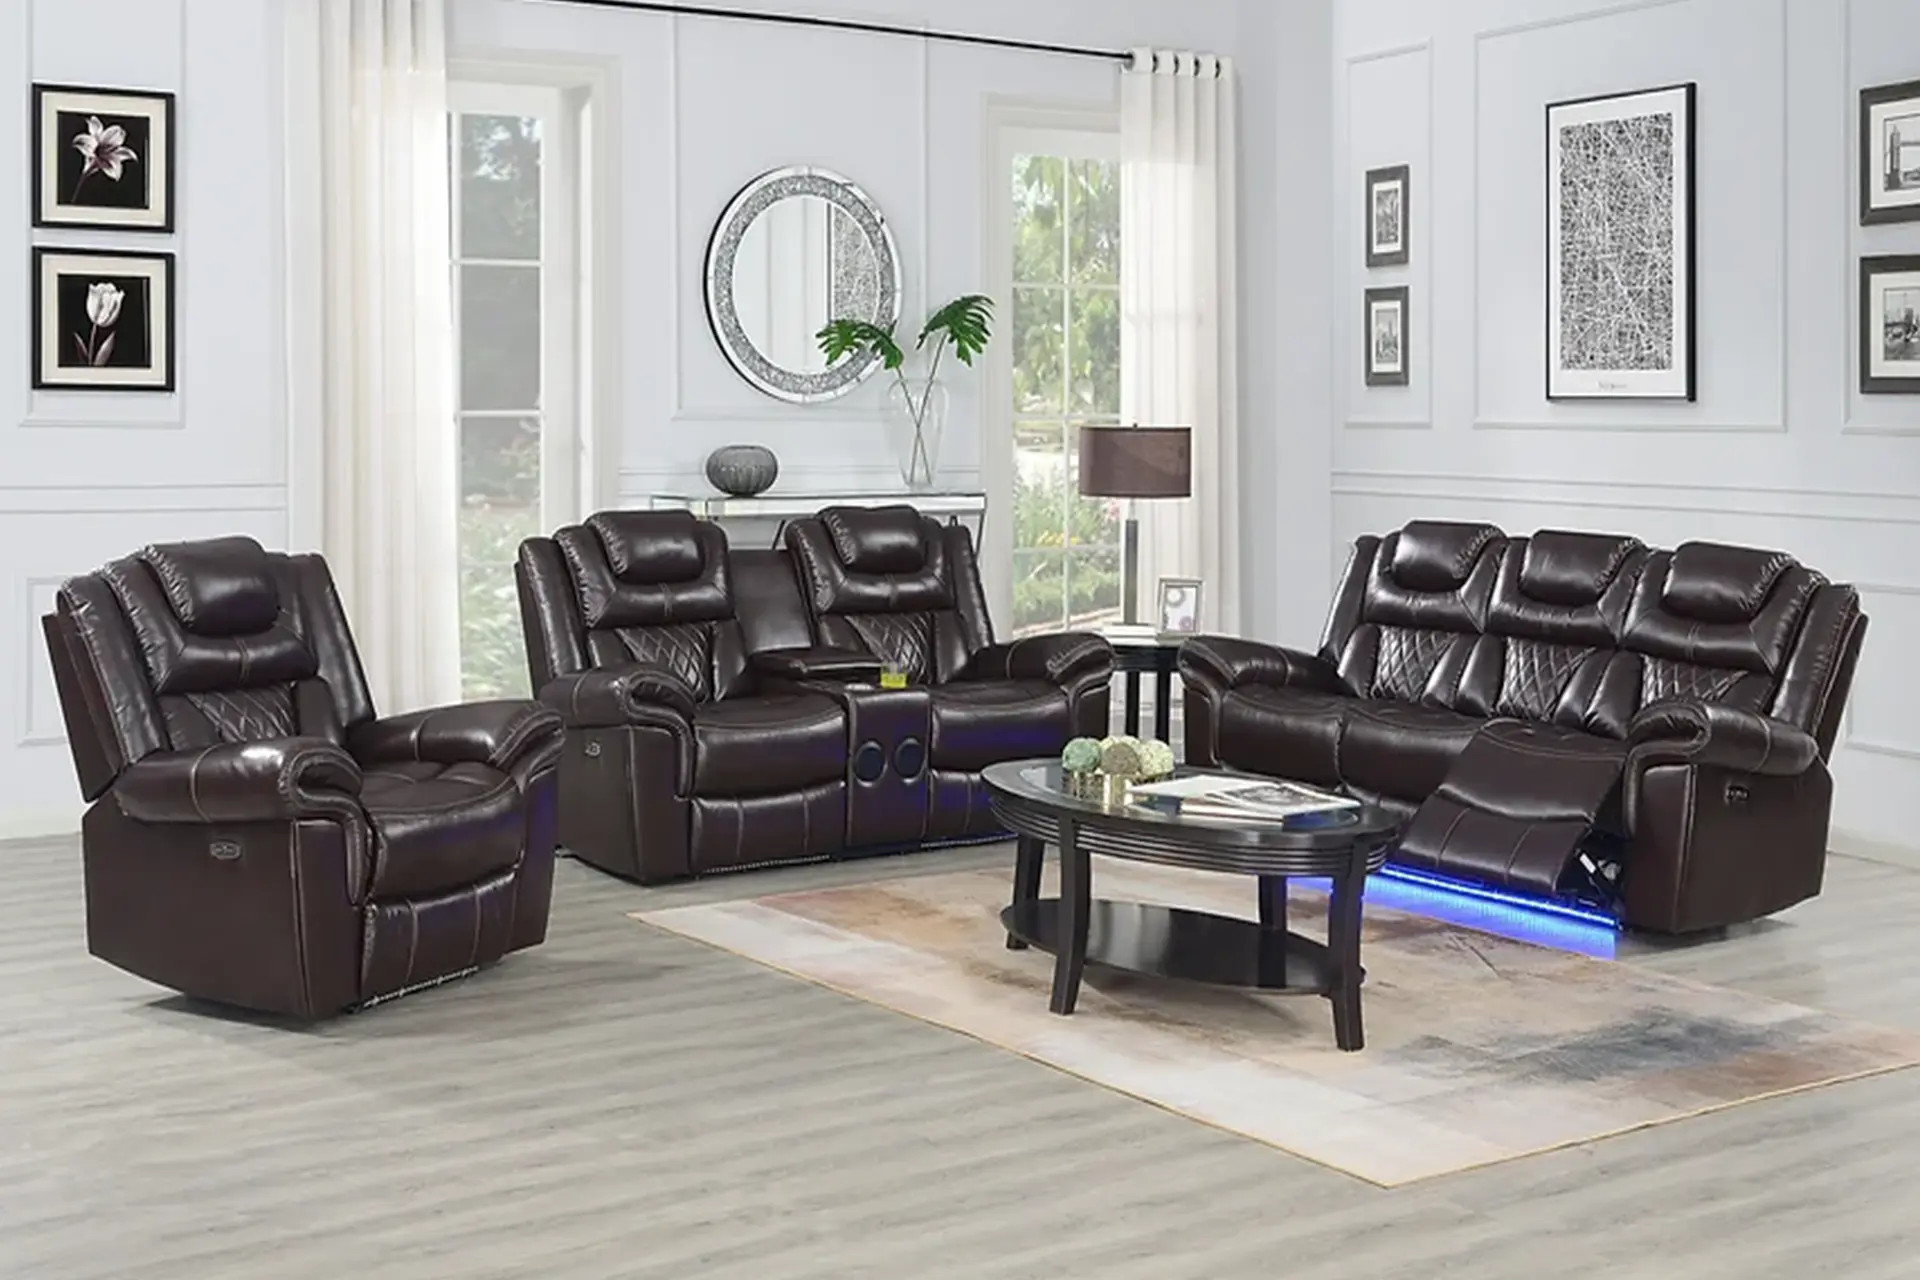 Party Time Brown Power Reclining Sofa, Love, and Recliner.